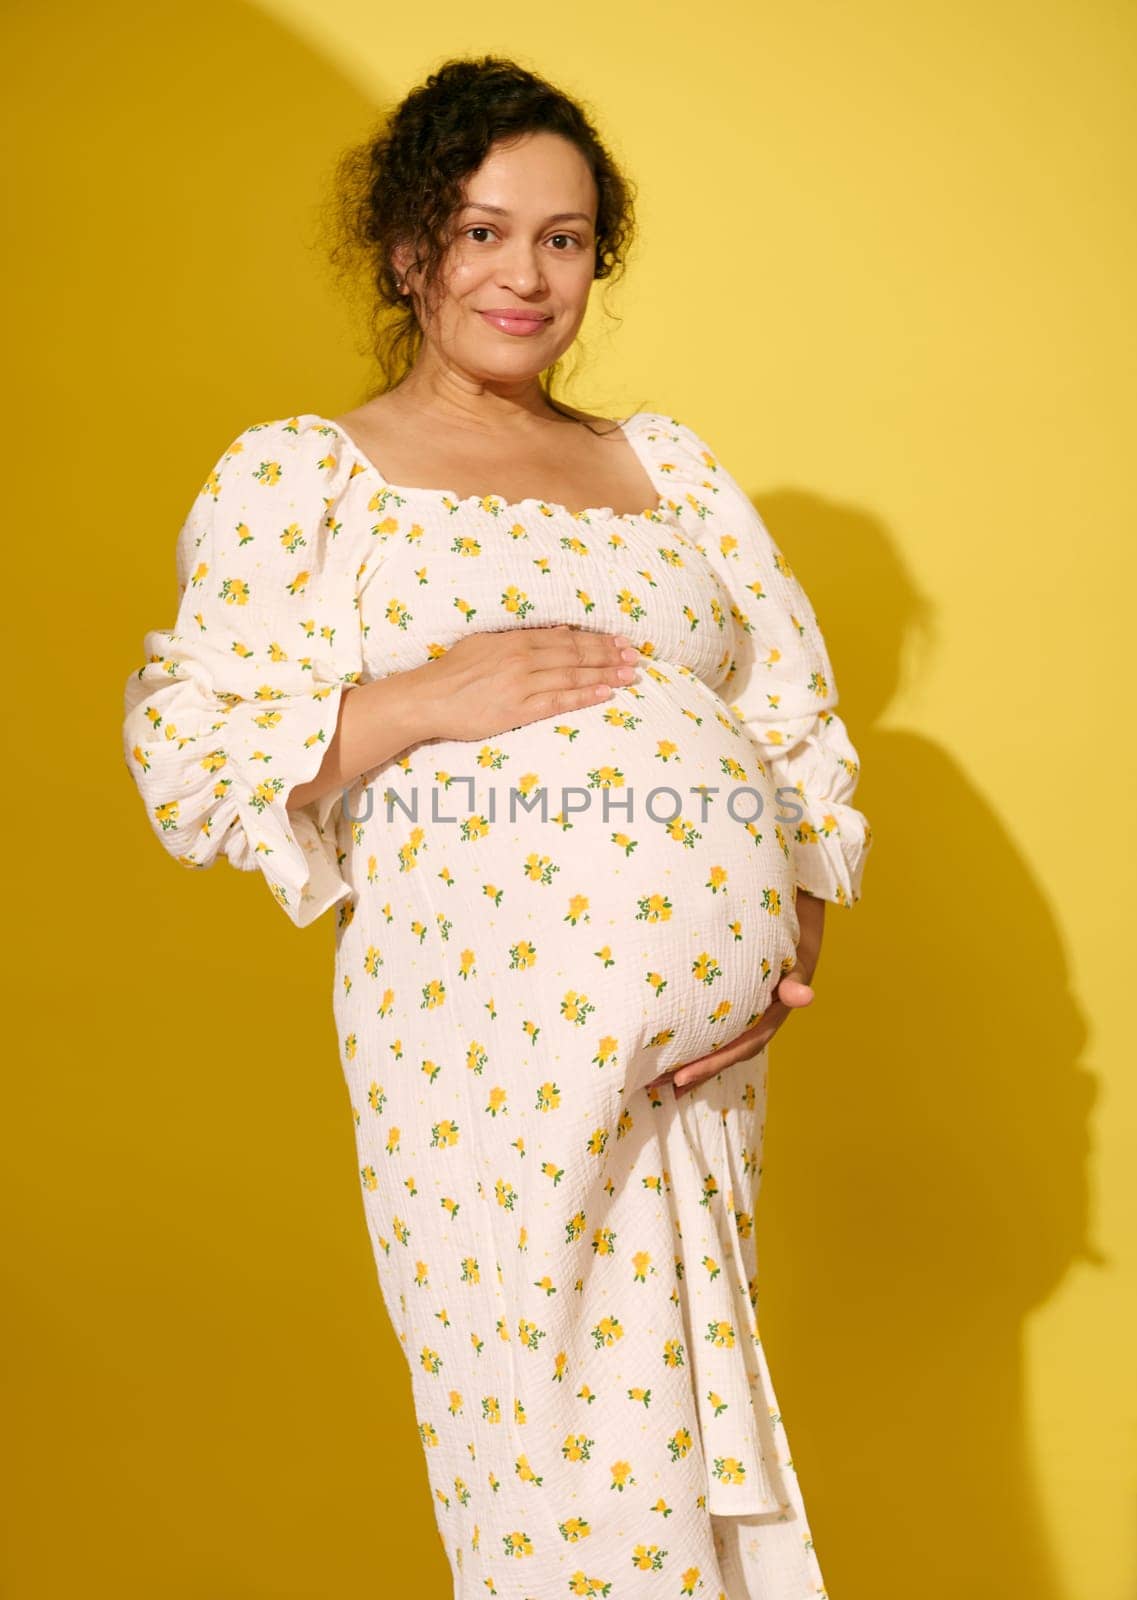 Beautiful curly haired pregnant woman in stylish summer sundress, gently caresses her belly, smiles looking at camera, isolated on yellow background. Beautiful pregnancy and maternity leave concept